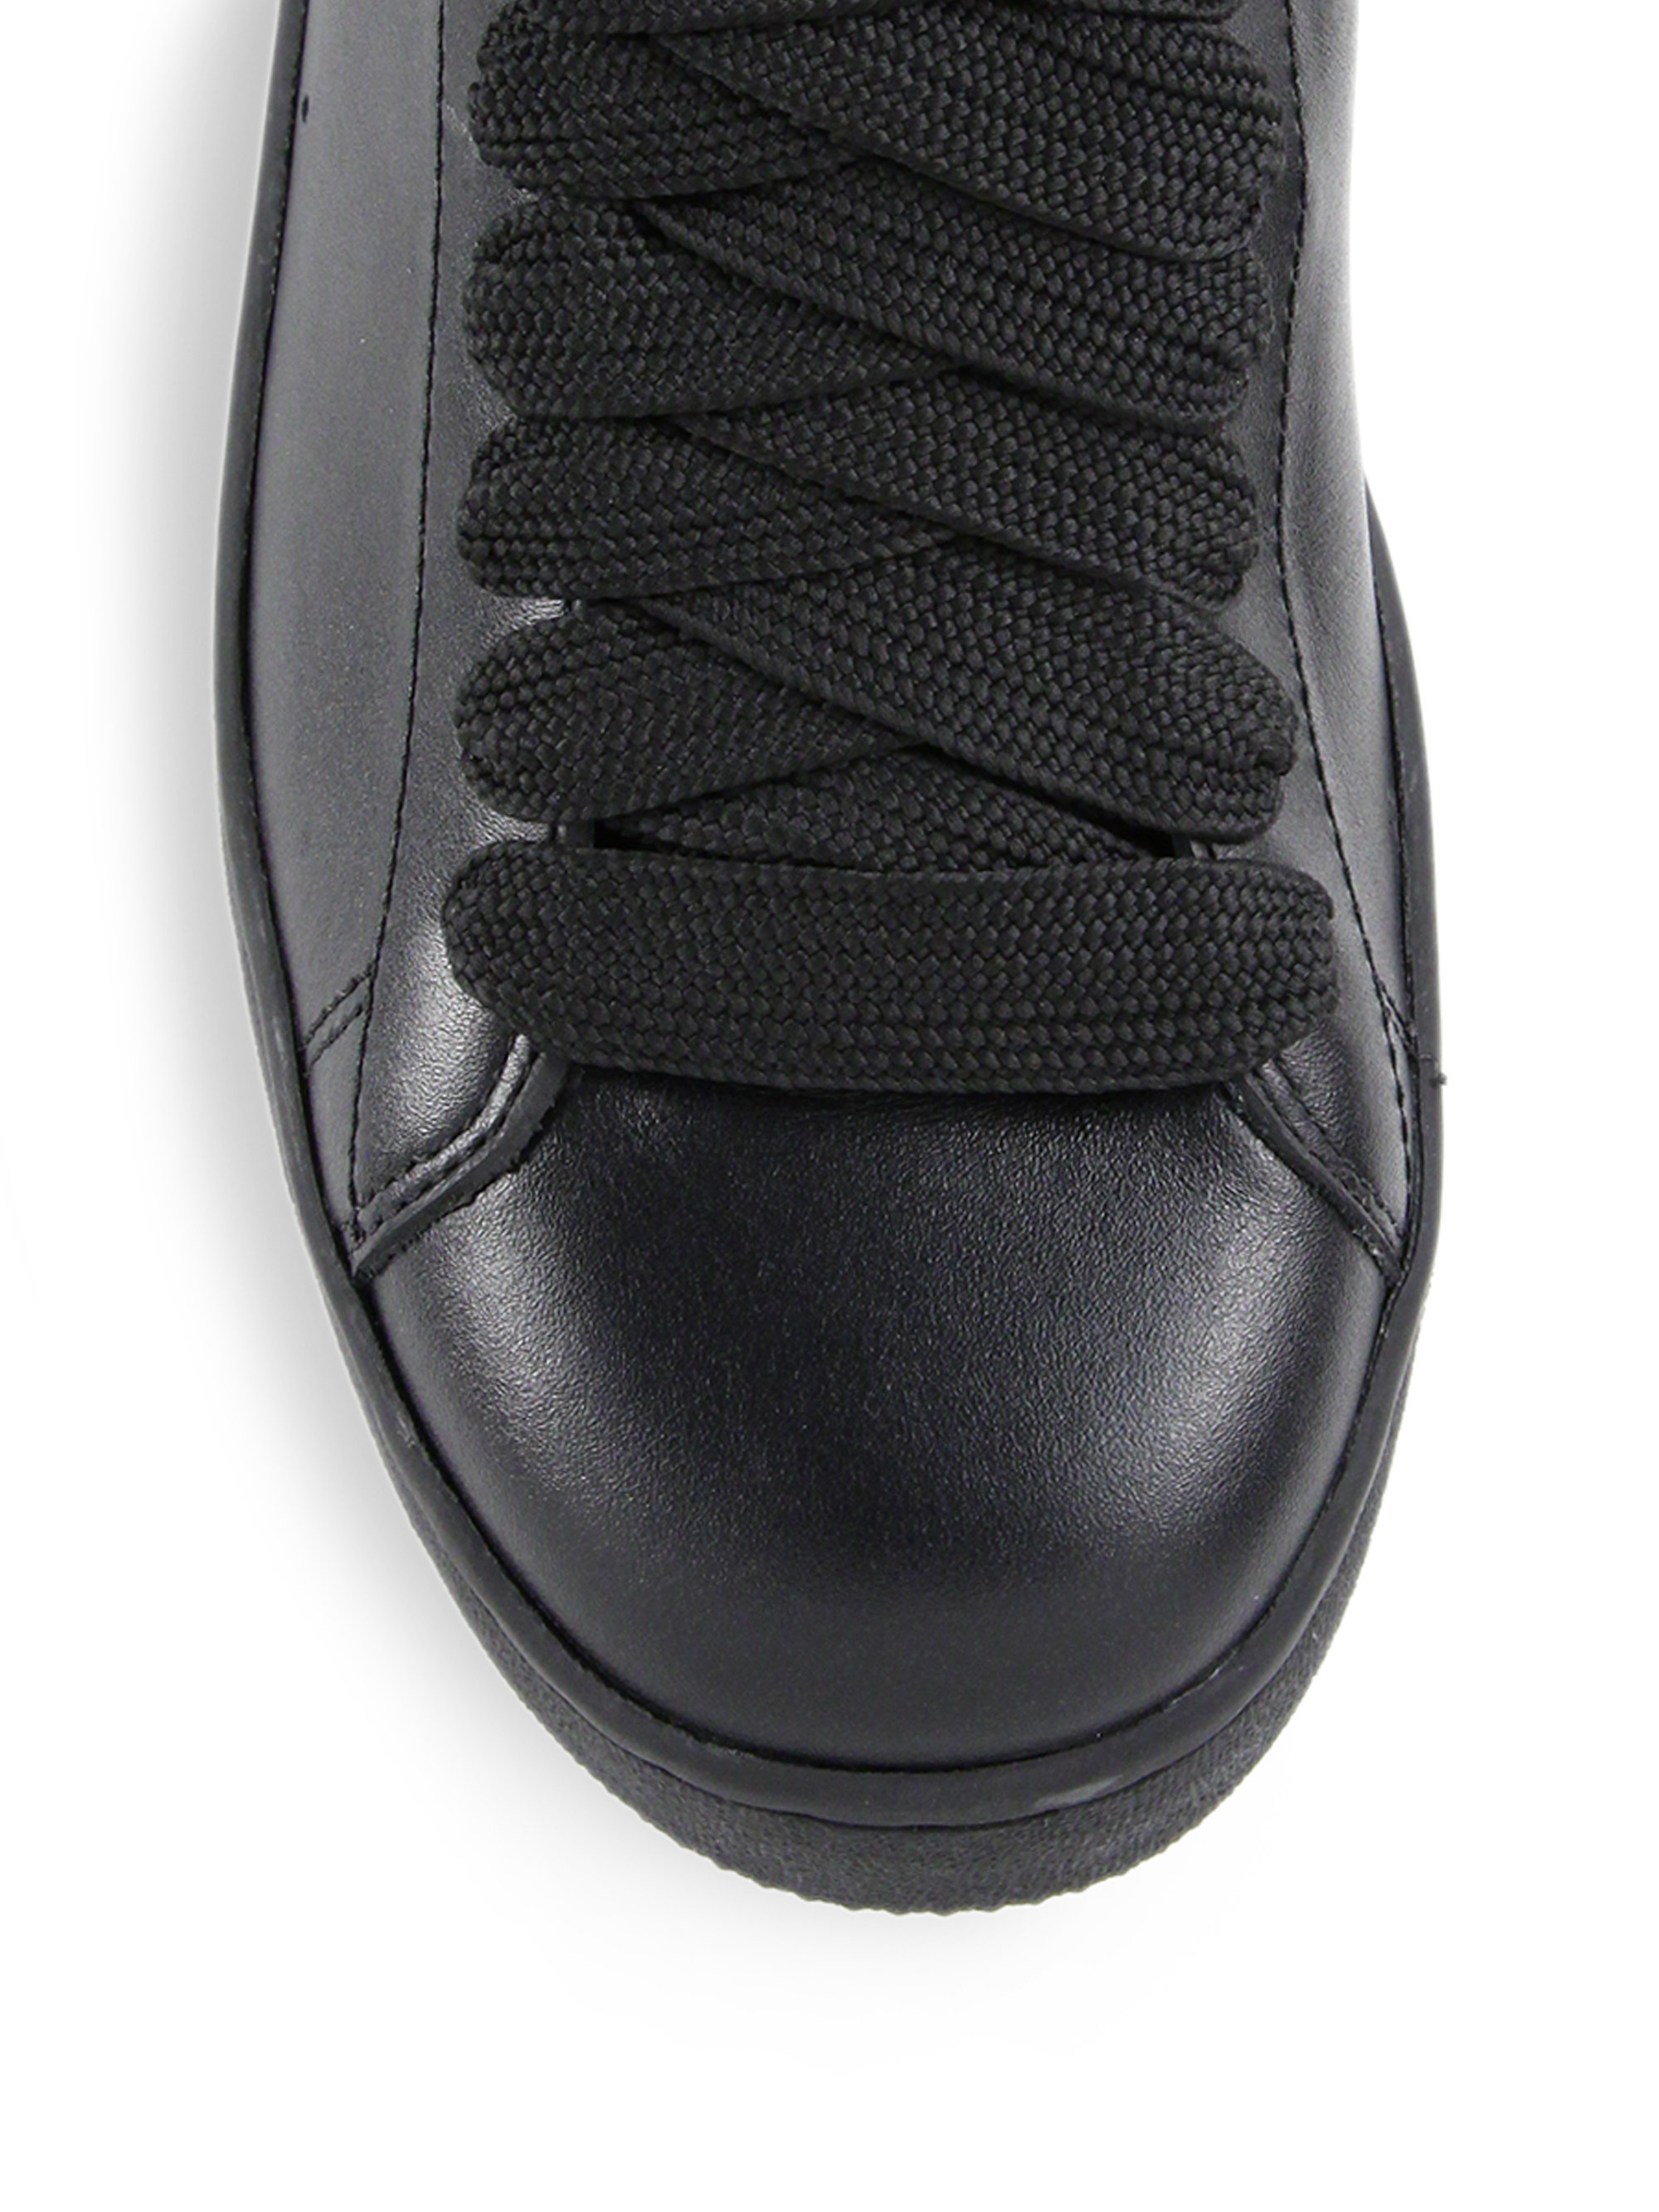 COACH Shearling-lined Leather Sneakers in Black for Men - Lyst